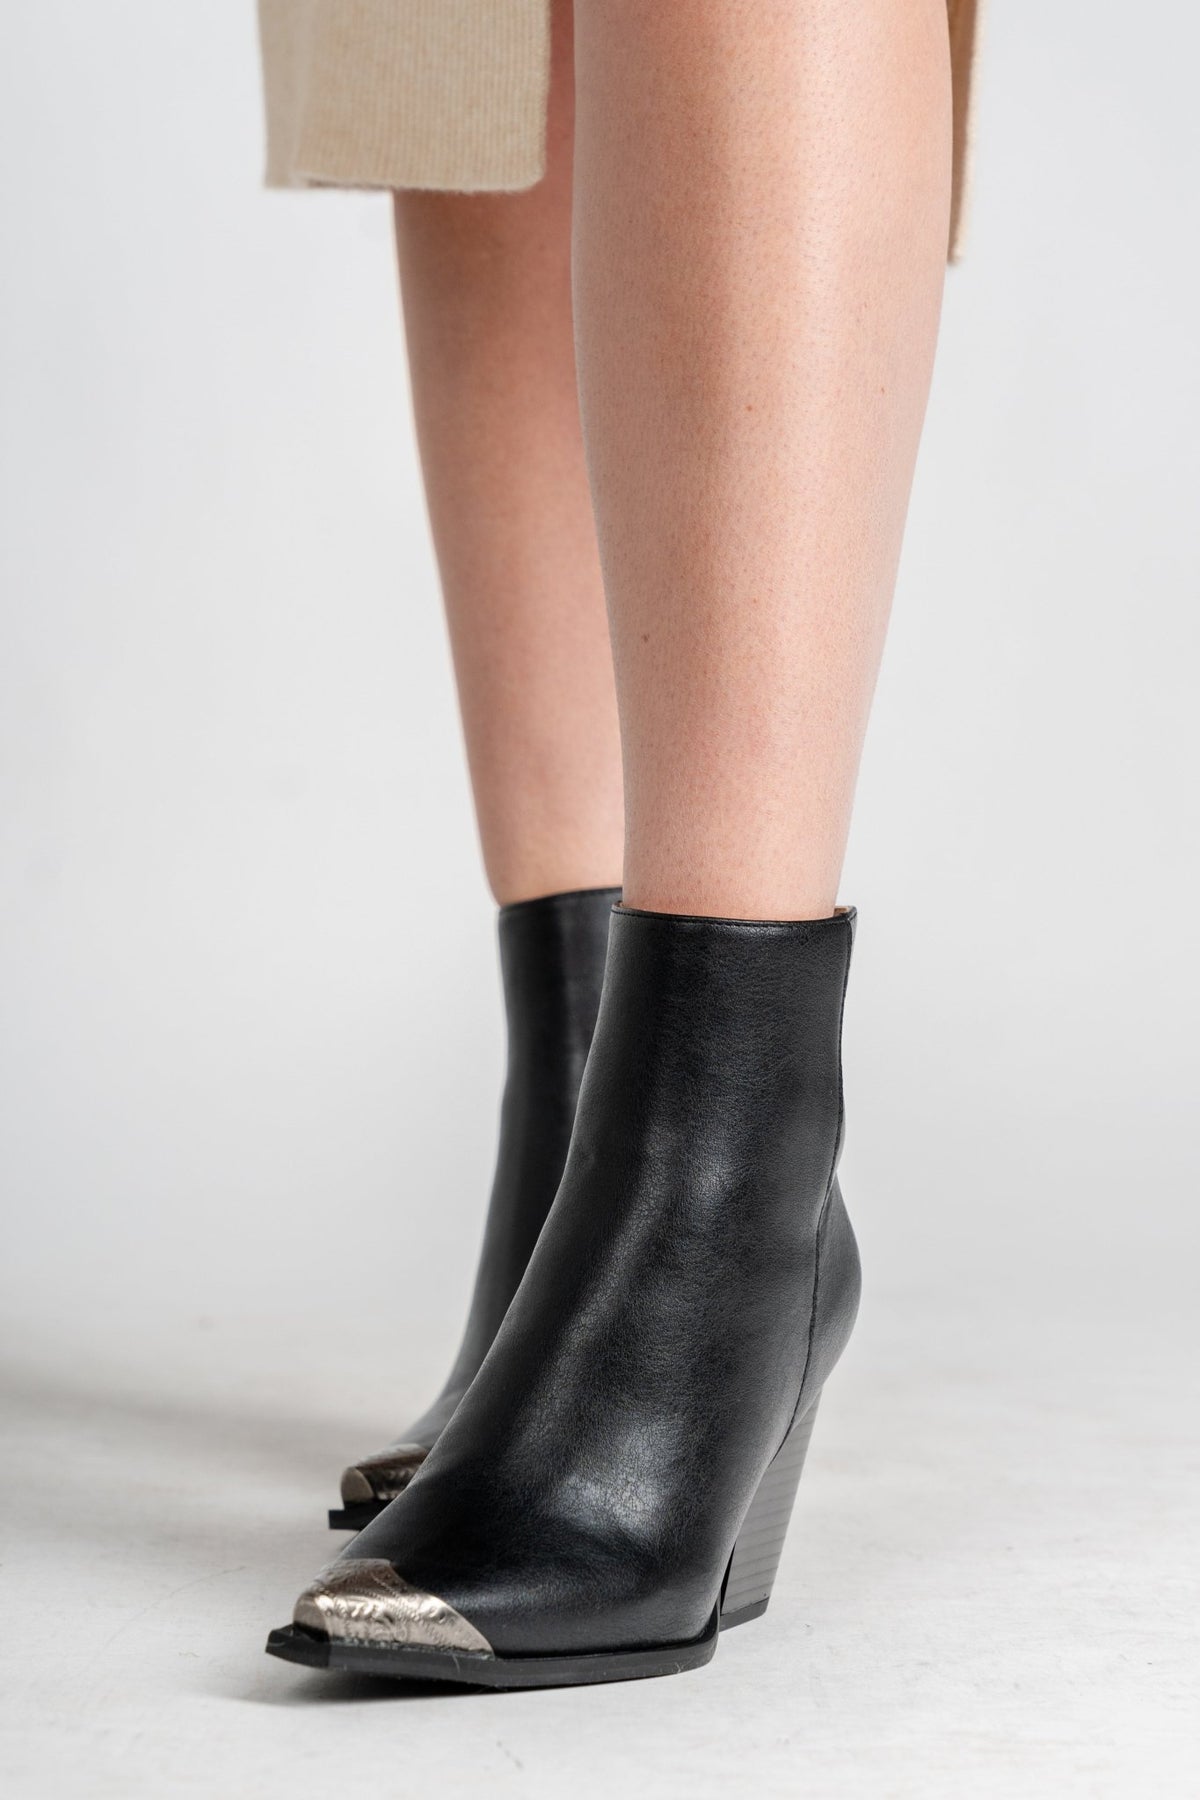 Zion cowboy boot black - Cute boots - Trendy Shoes at Lush Fashion Lounge Boutique in Oklahoma City